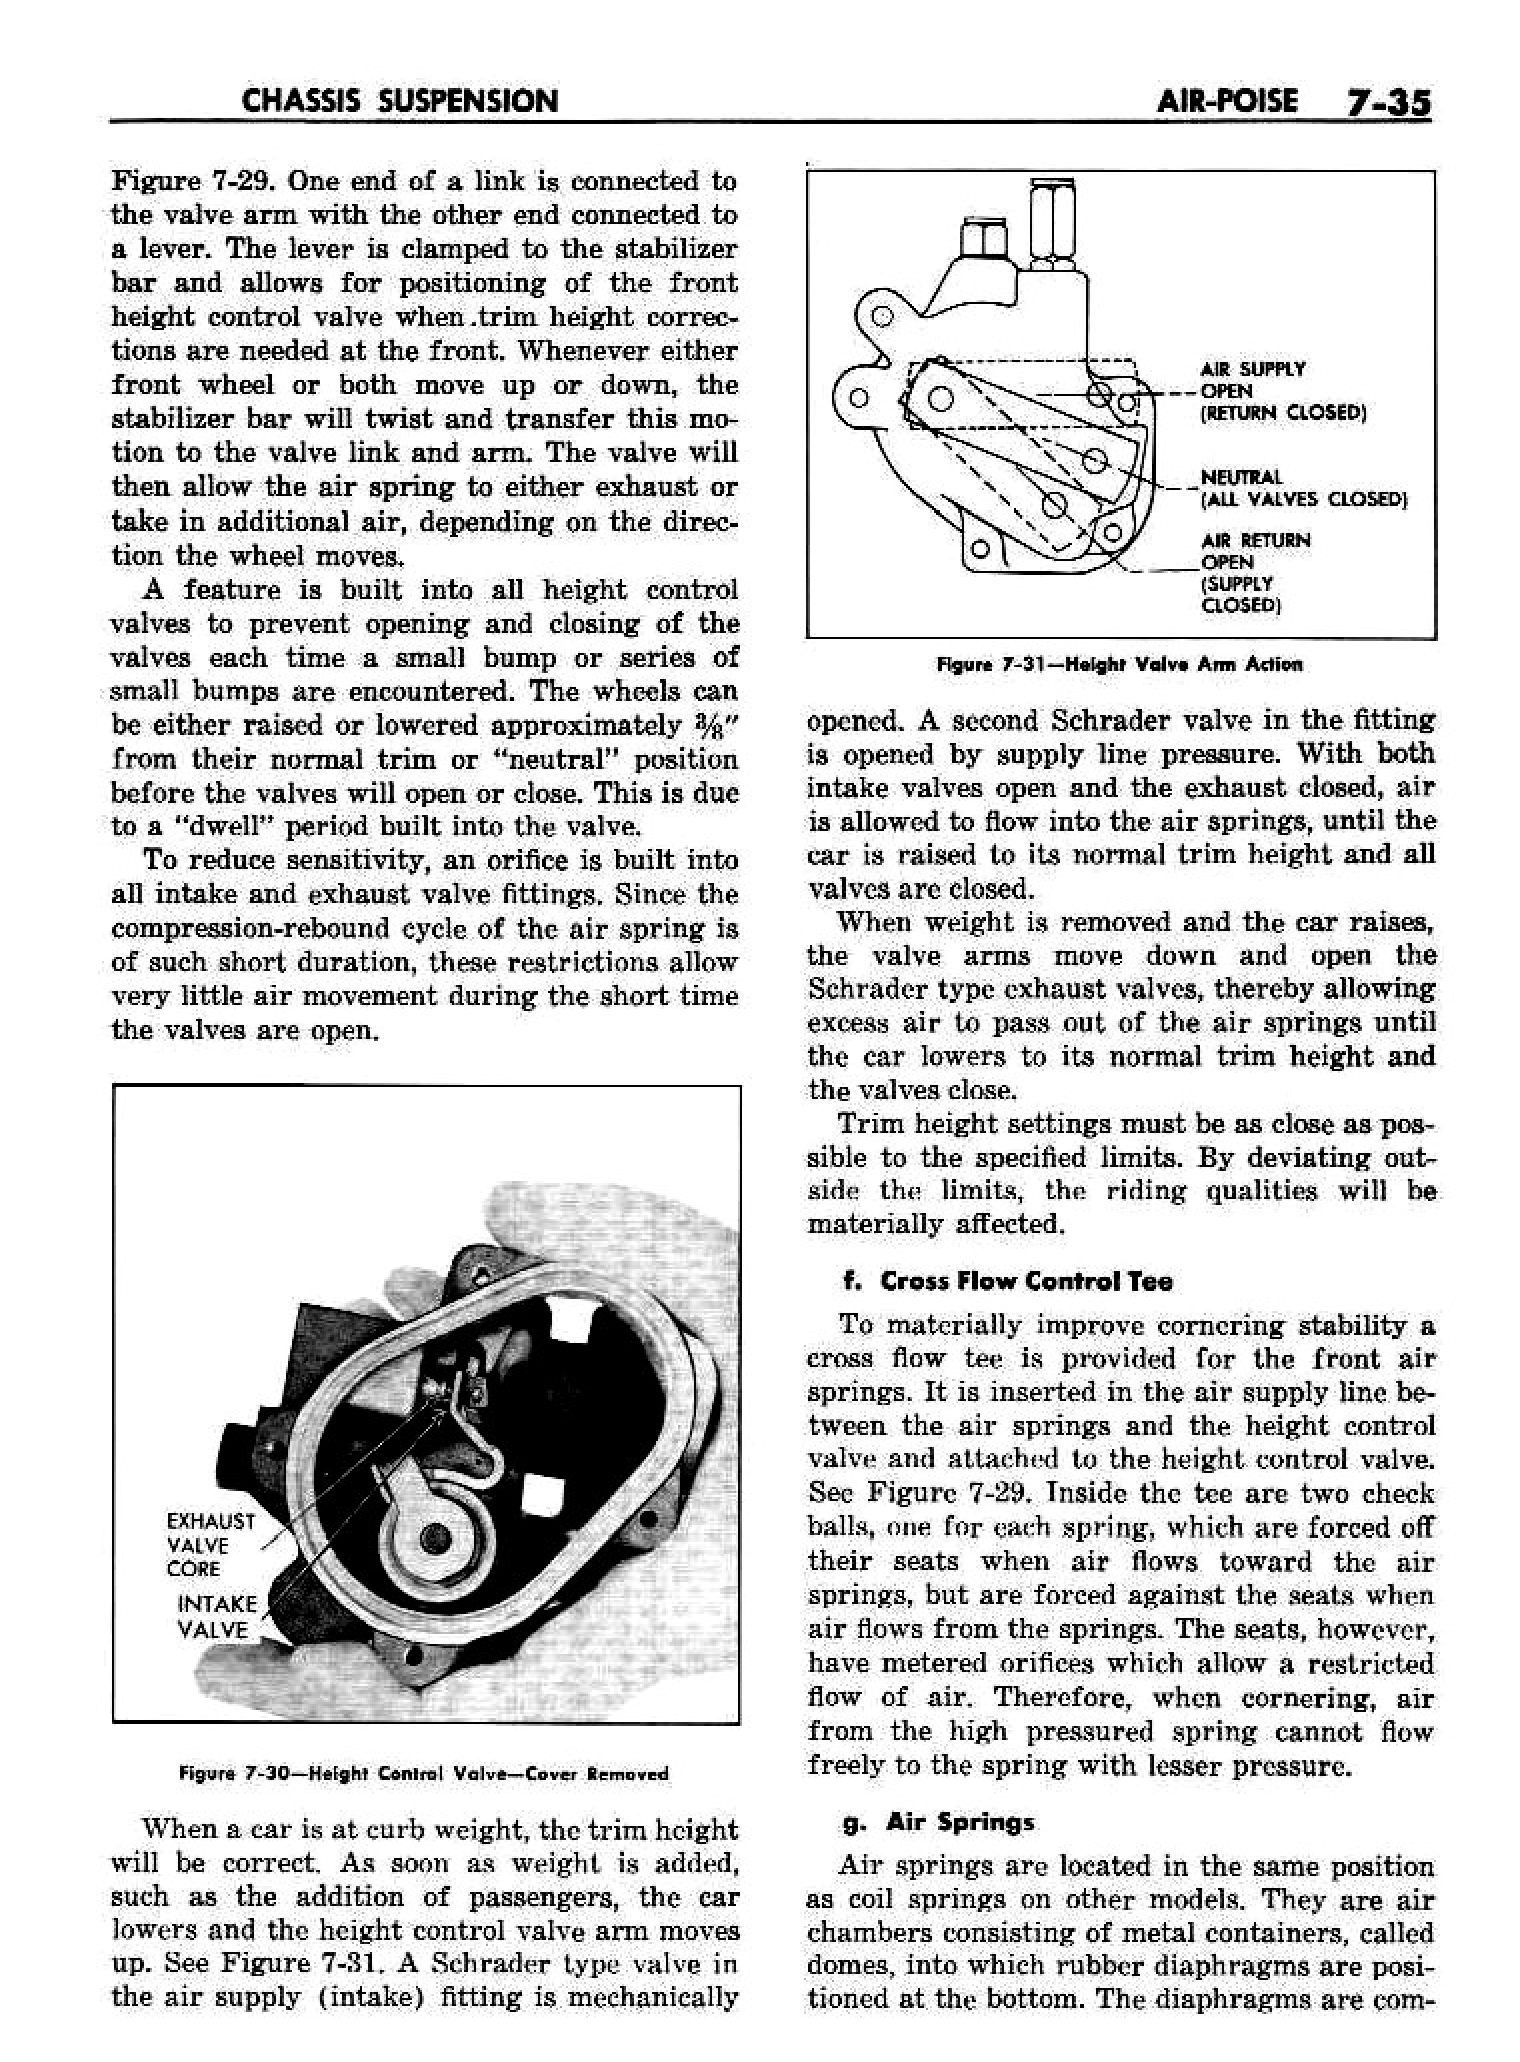 n_08 1958 Buick Shop Manual - Chassis Suspension_35.jpg